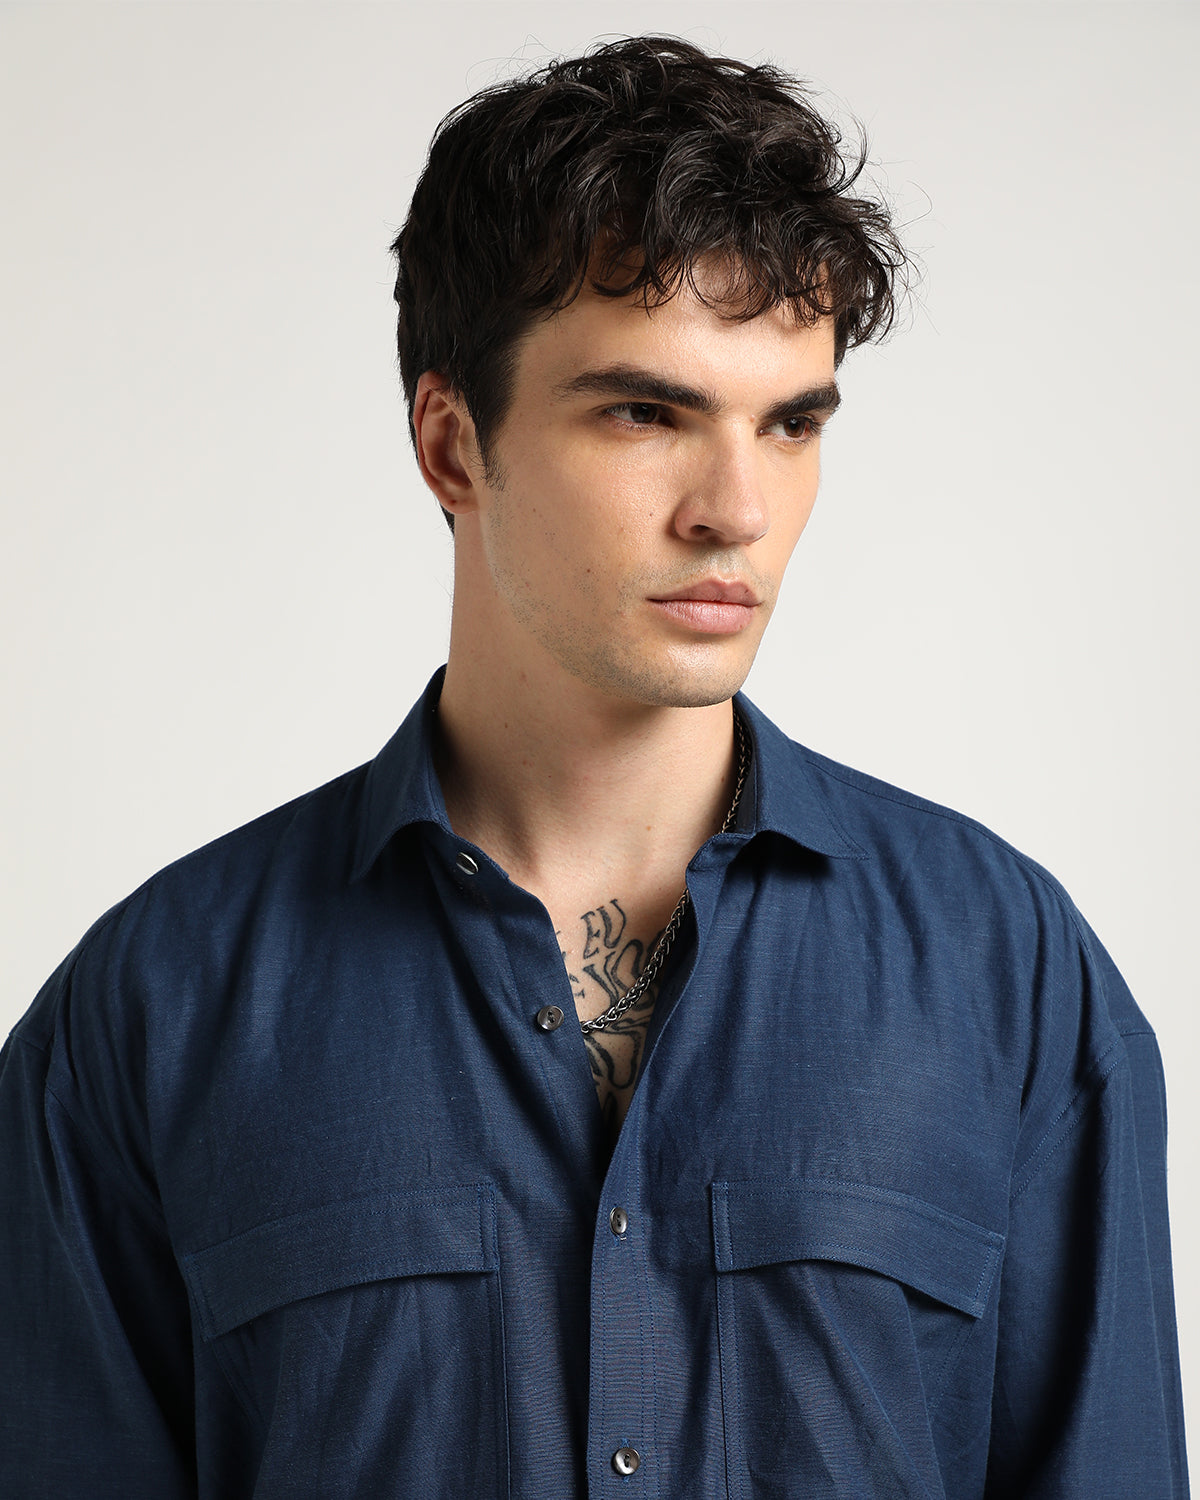 ORGANIC BLUE OVER-SIZED DOUBLE POCKET OVER SHIRT